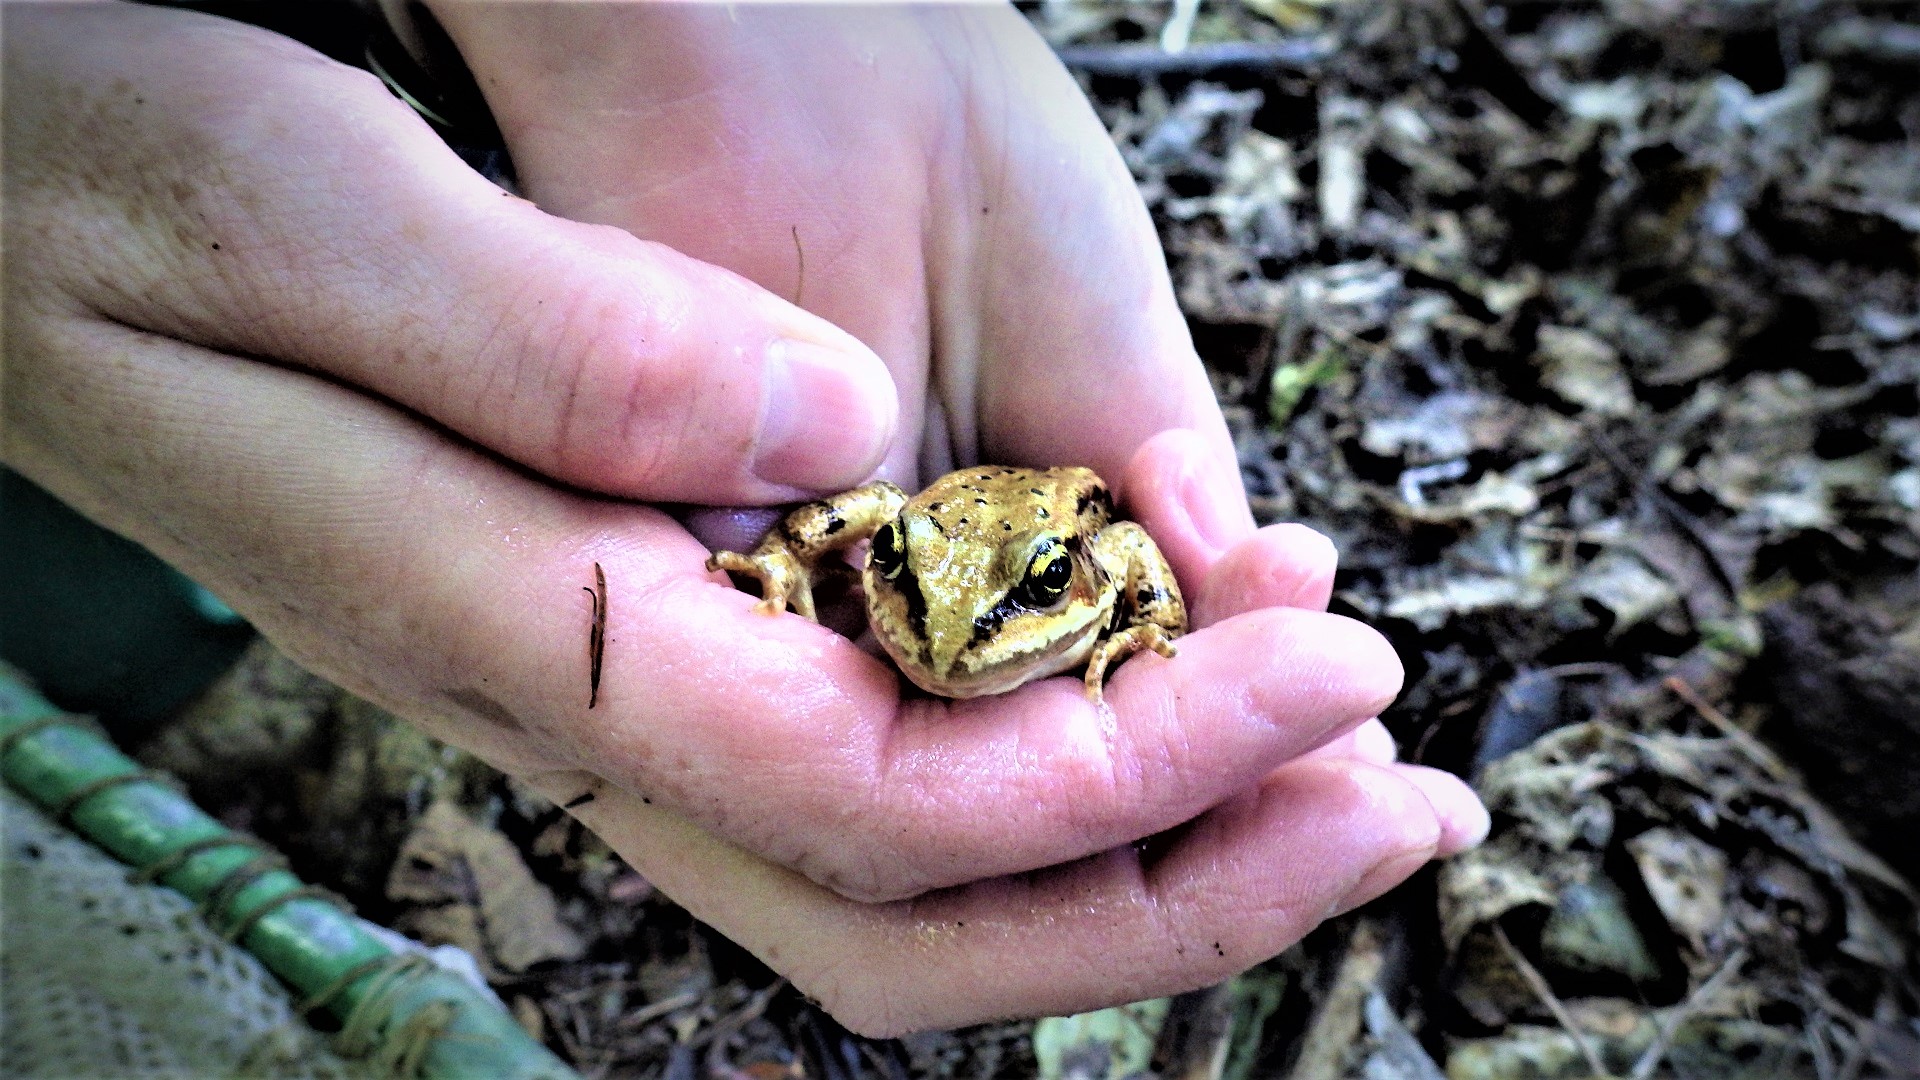 A frog with black eye stripes in a crewmembers hands